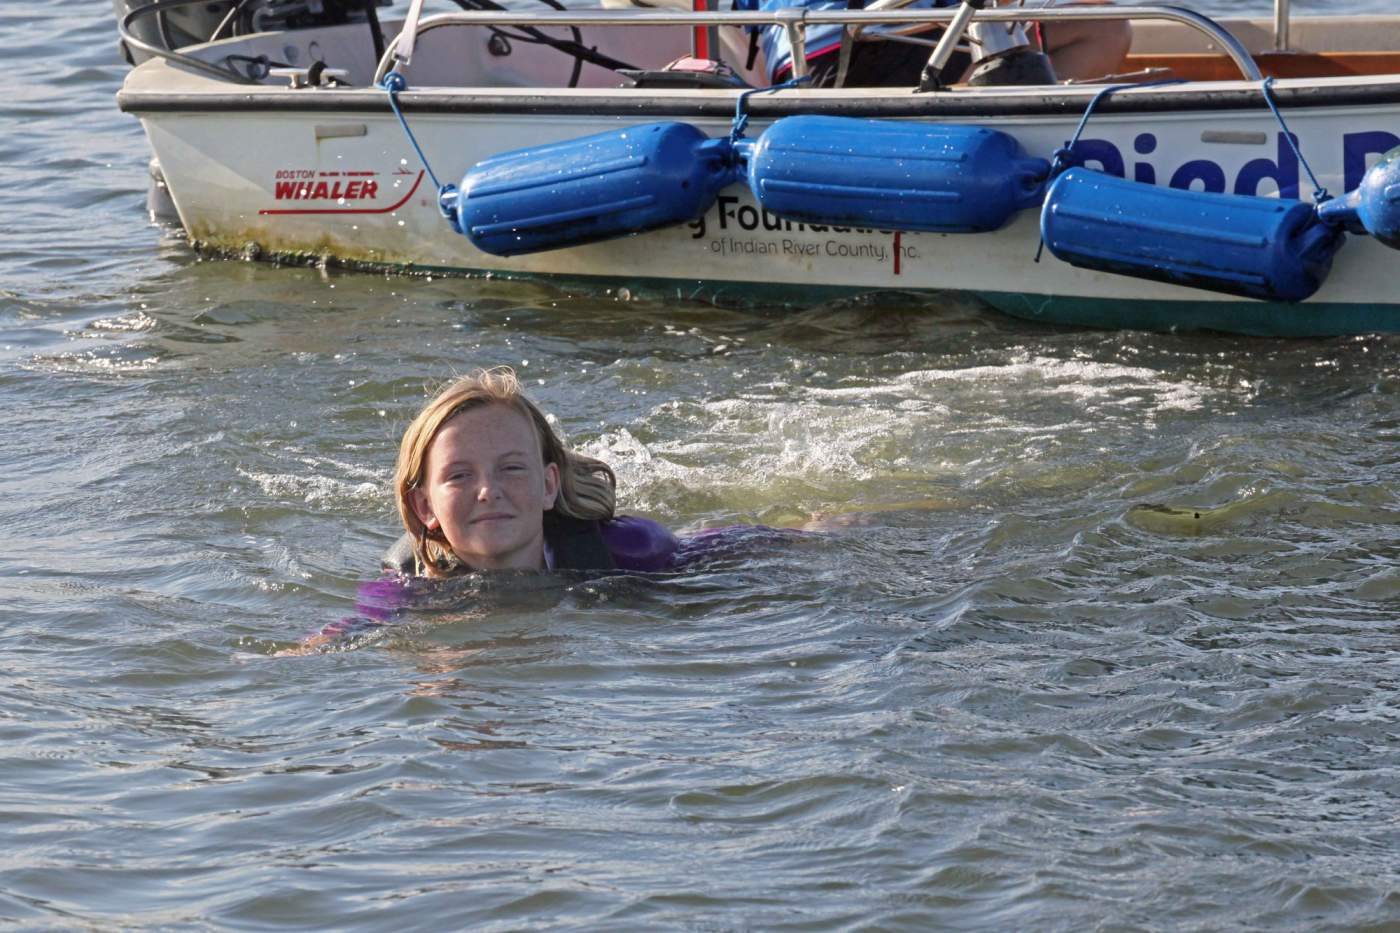 Young girl swimming away from boat